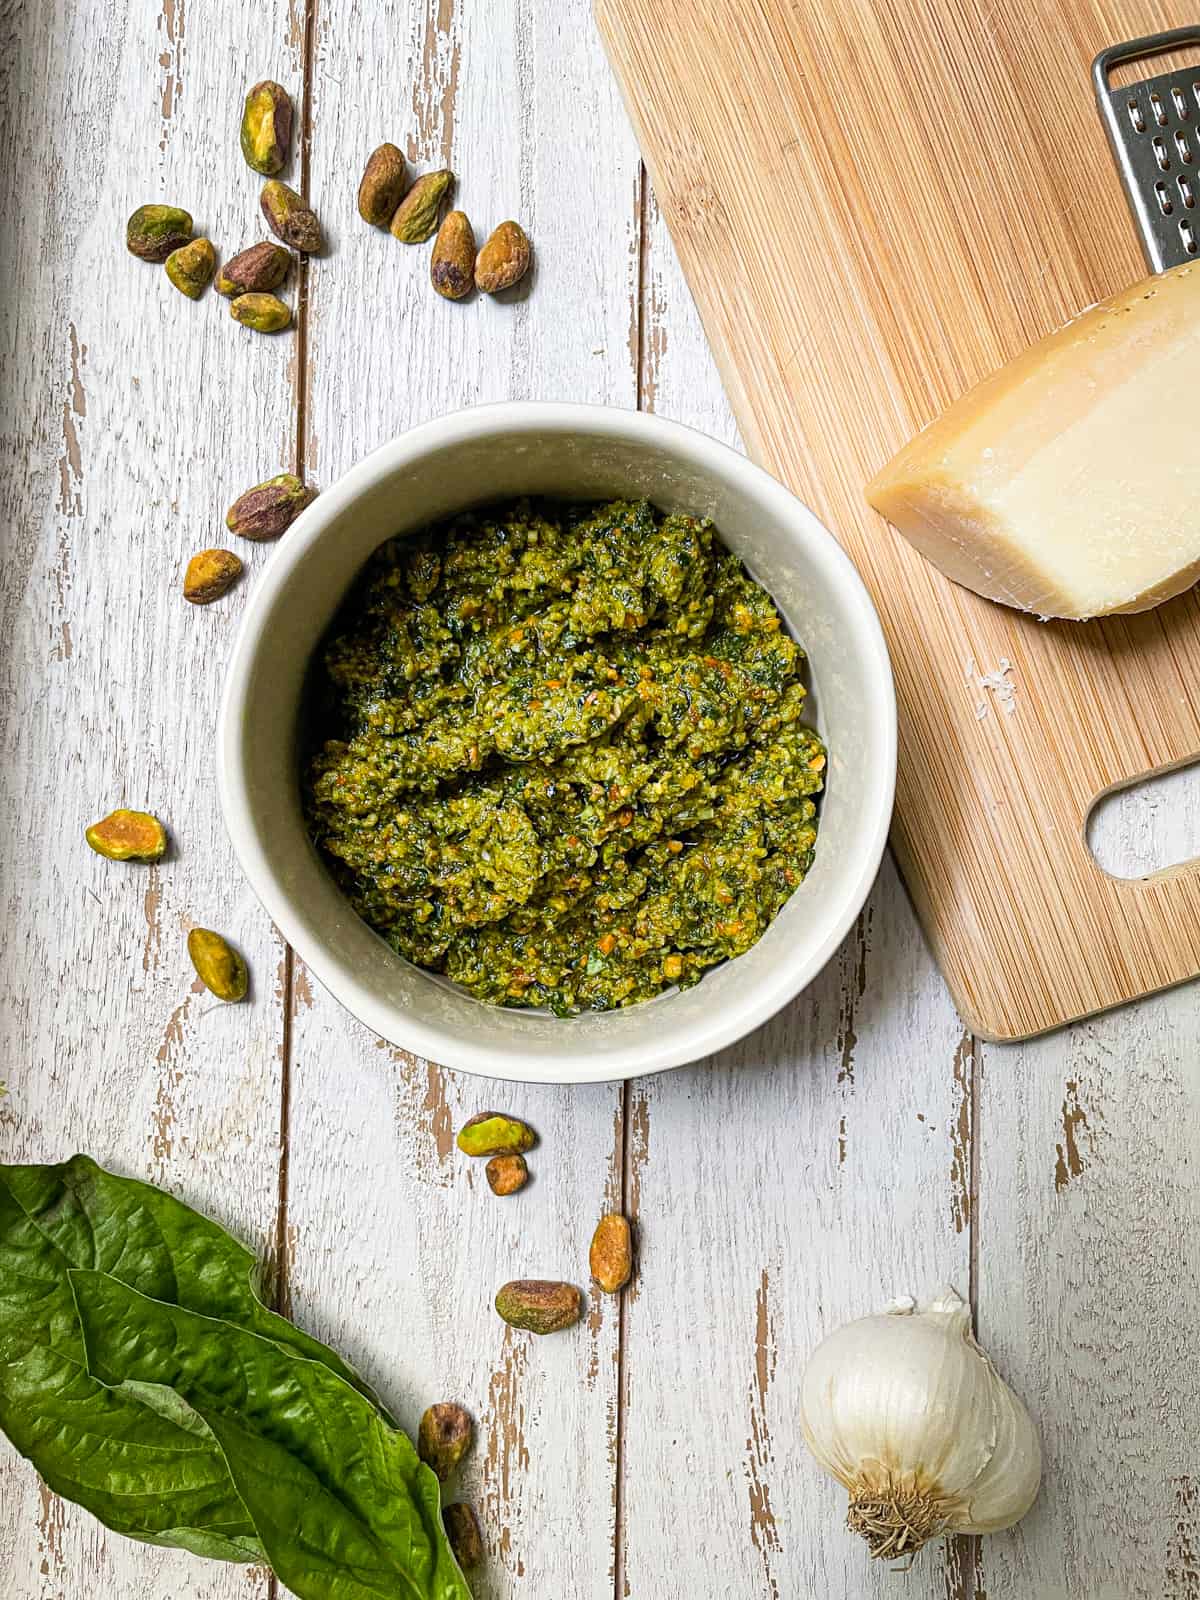 Pesto in a white bowl on a white table with basil leaves and cheese on cutting board.